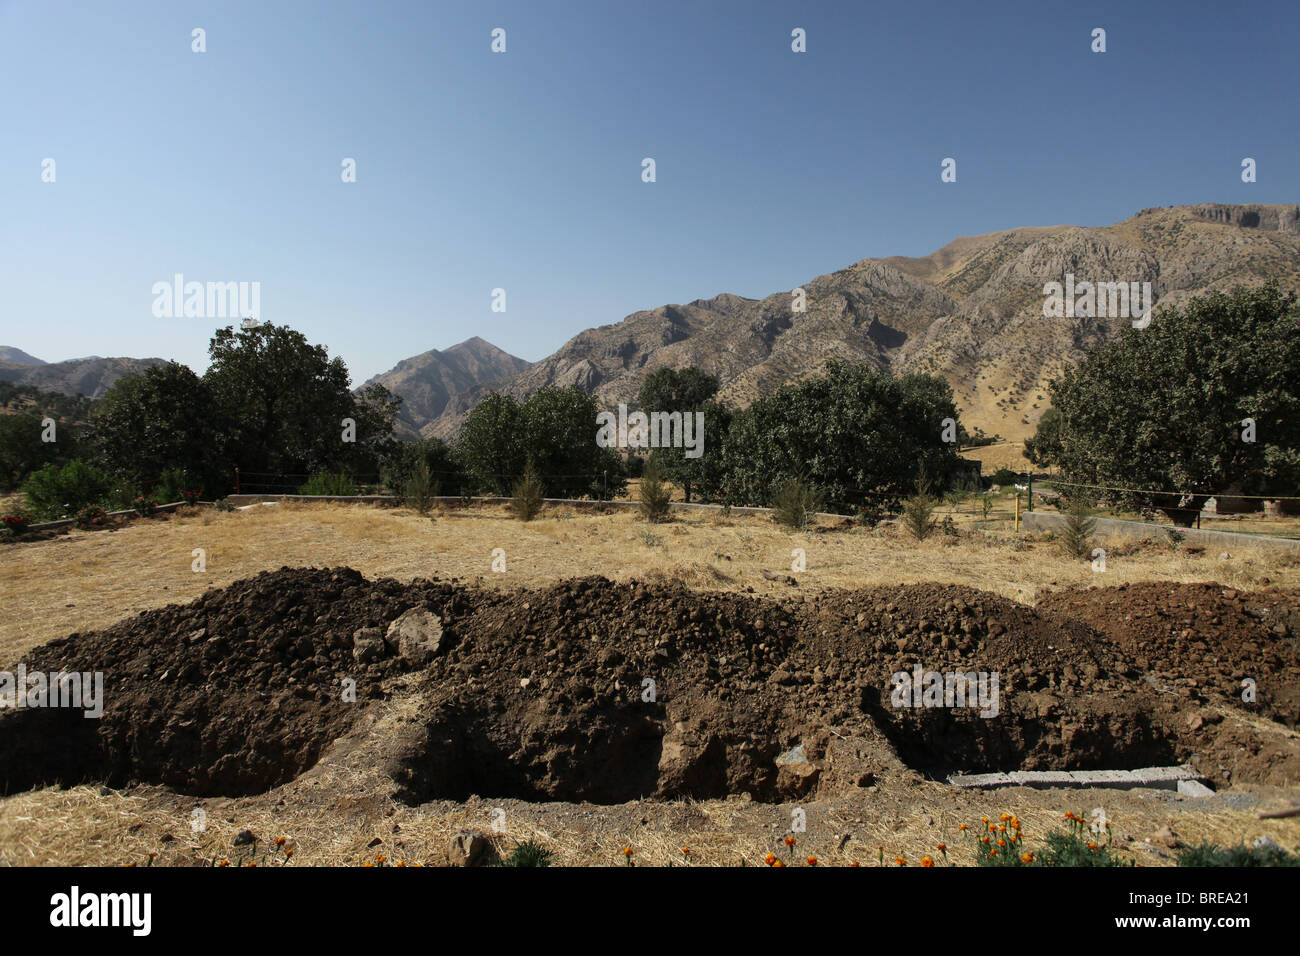 Fresh graves being dug in Mehmet Karasungur Cemetery which is burial site for fallen Kurdish fighters of the People's Defense Forces HPG the military wing of the Kurdistan Workers' Party PKK located in the Qandil Mountains a mountainous area of Iraqi Kurdistan near the Iraq Iran border Stock Photo